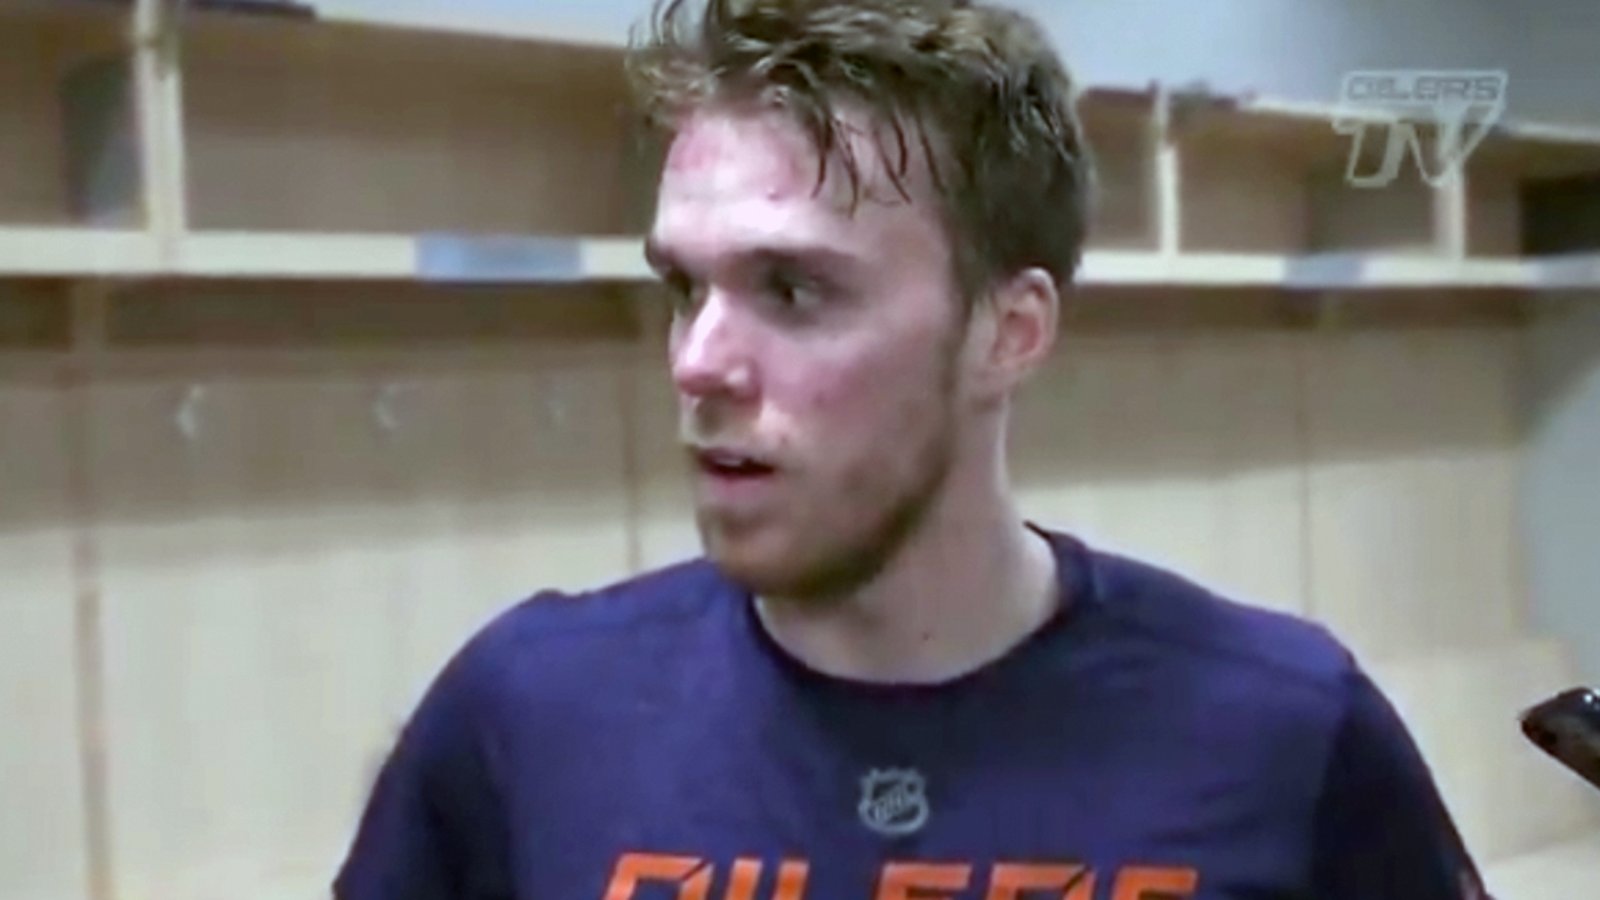 A visibly frustrated and angry McDavid reacts live to the news that the Oilers have been eliminated from playoff contention